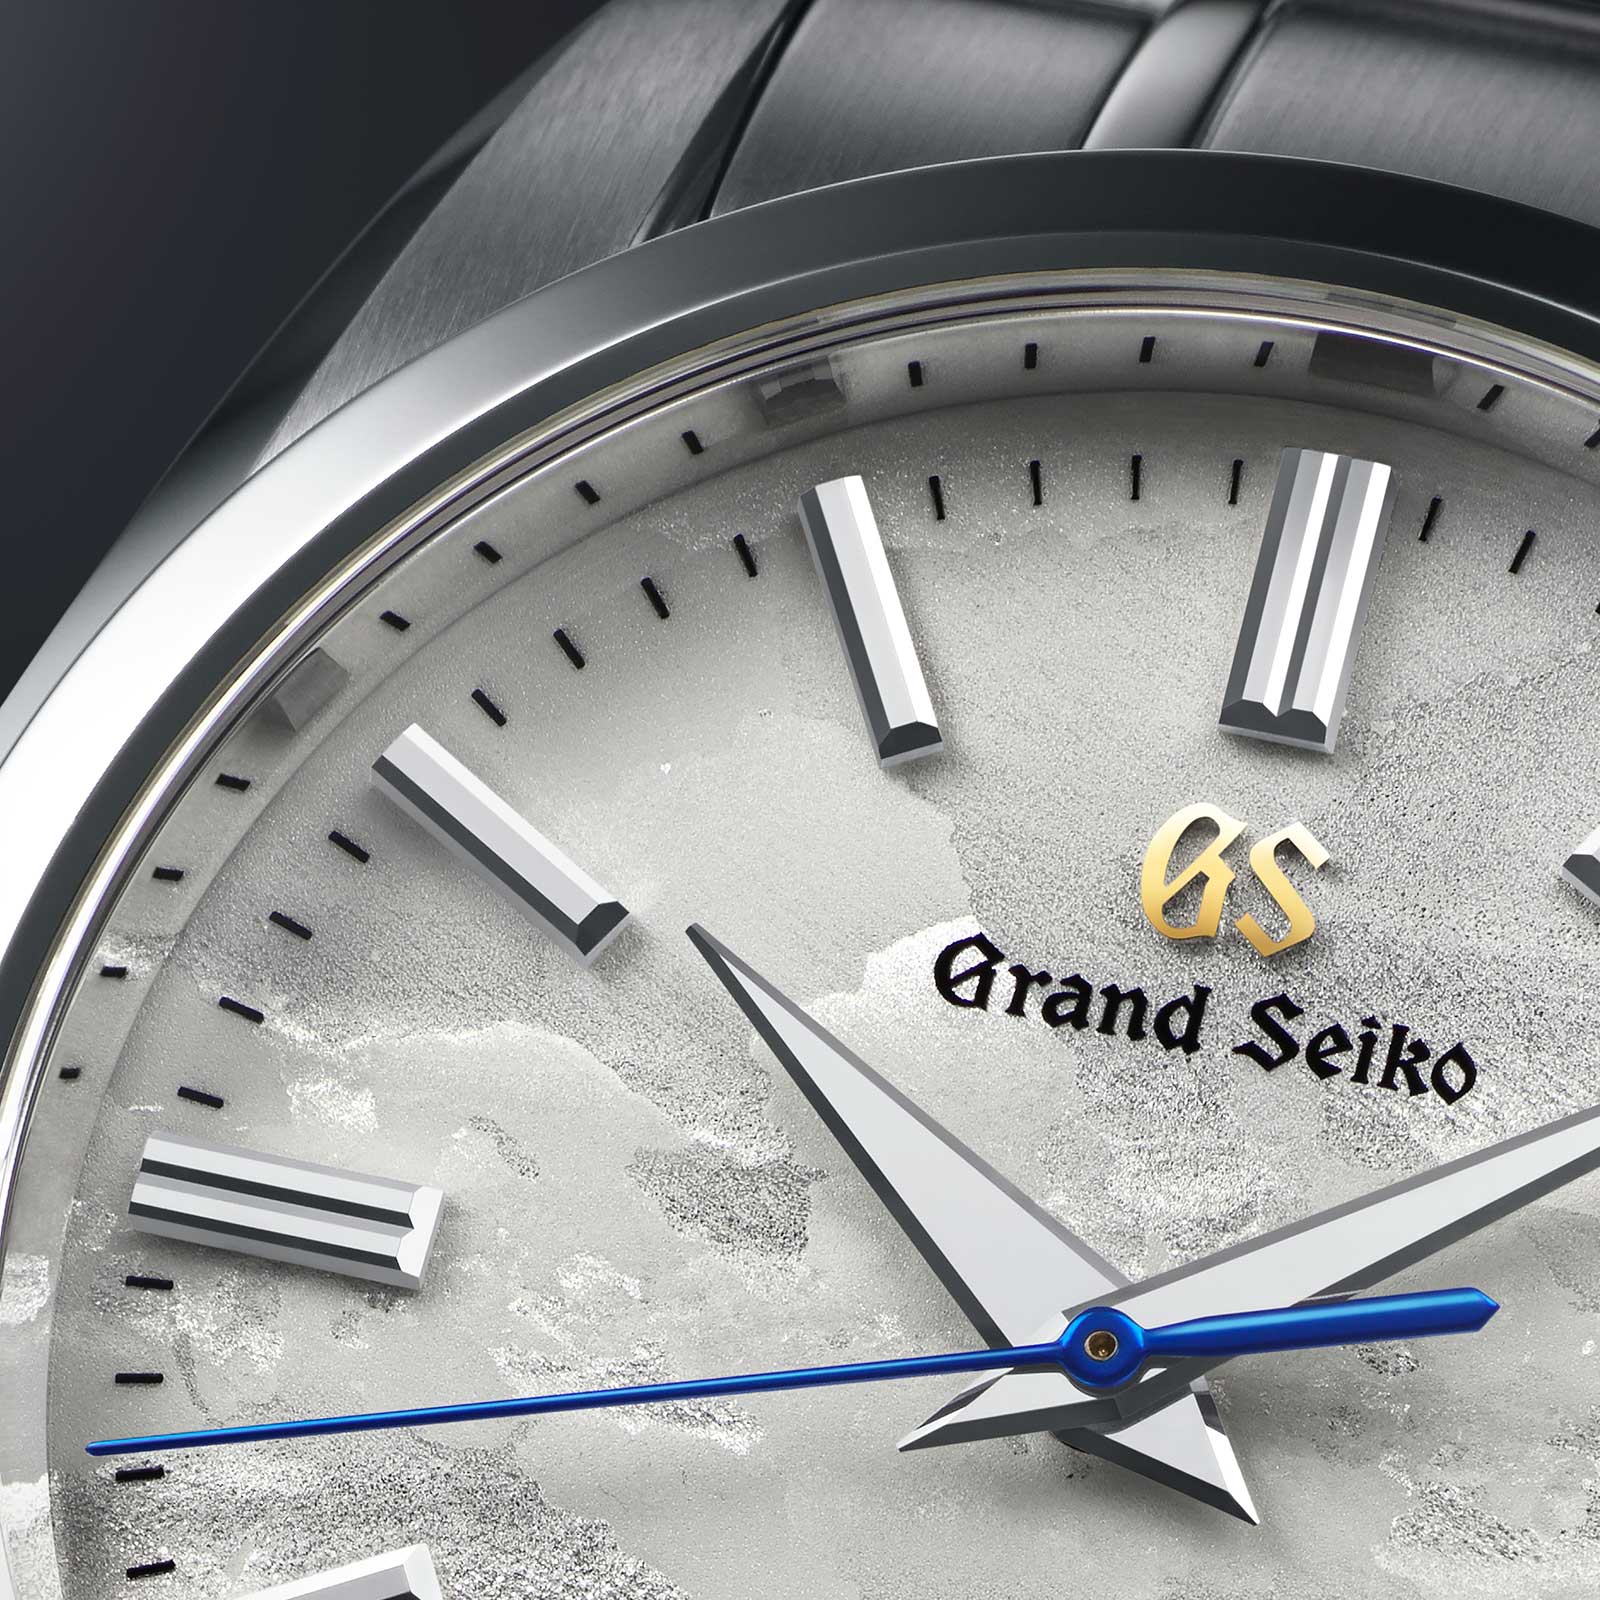 Grand Seiko Hi-Beat 36000 watch in stainless steel with silver dial